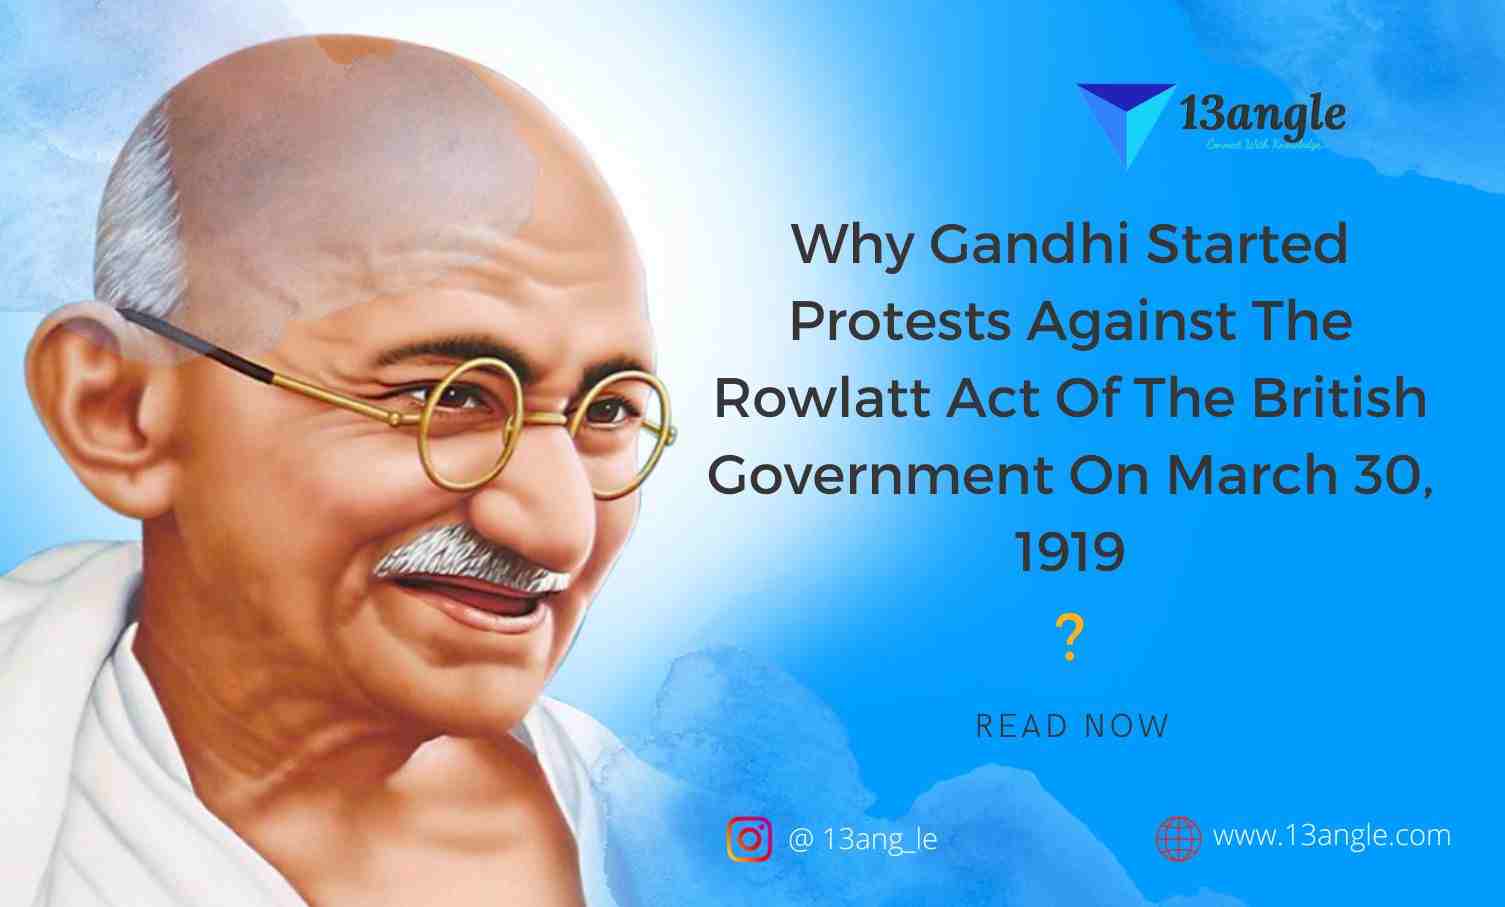 Why Gandhi Started Protests Against The Rowlatt Act Of The British Government On March 30, 1919- 13angle.com